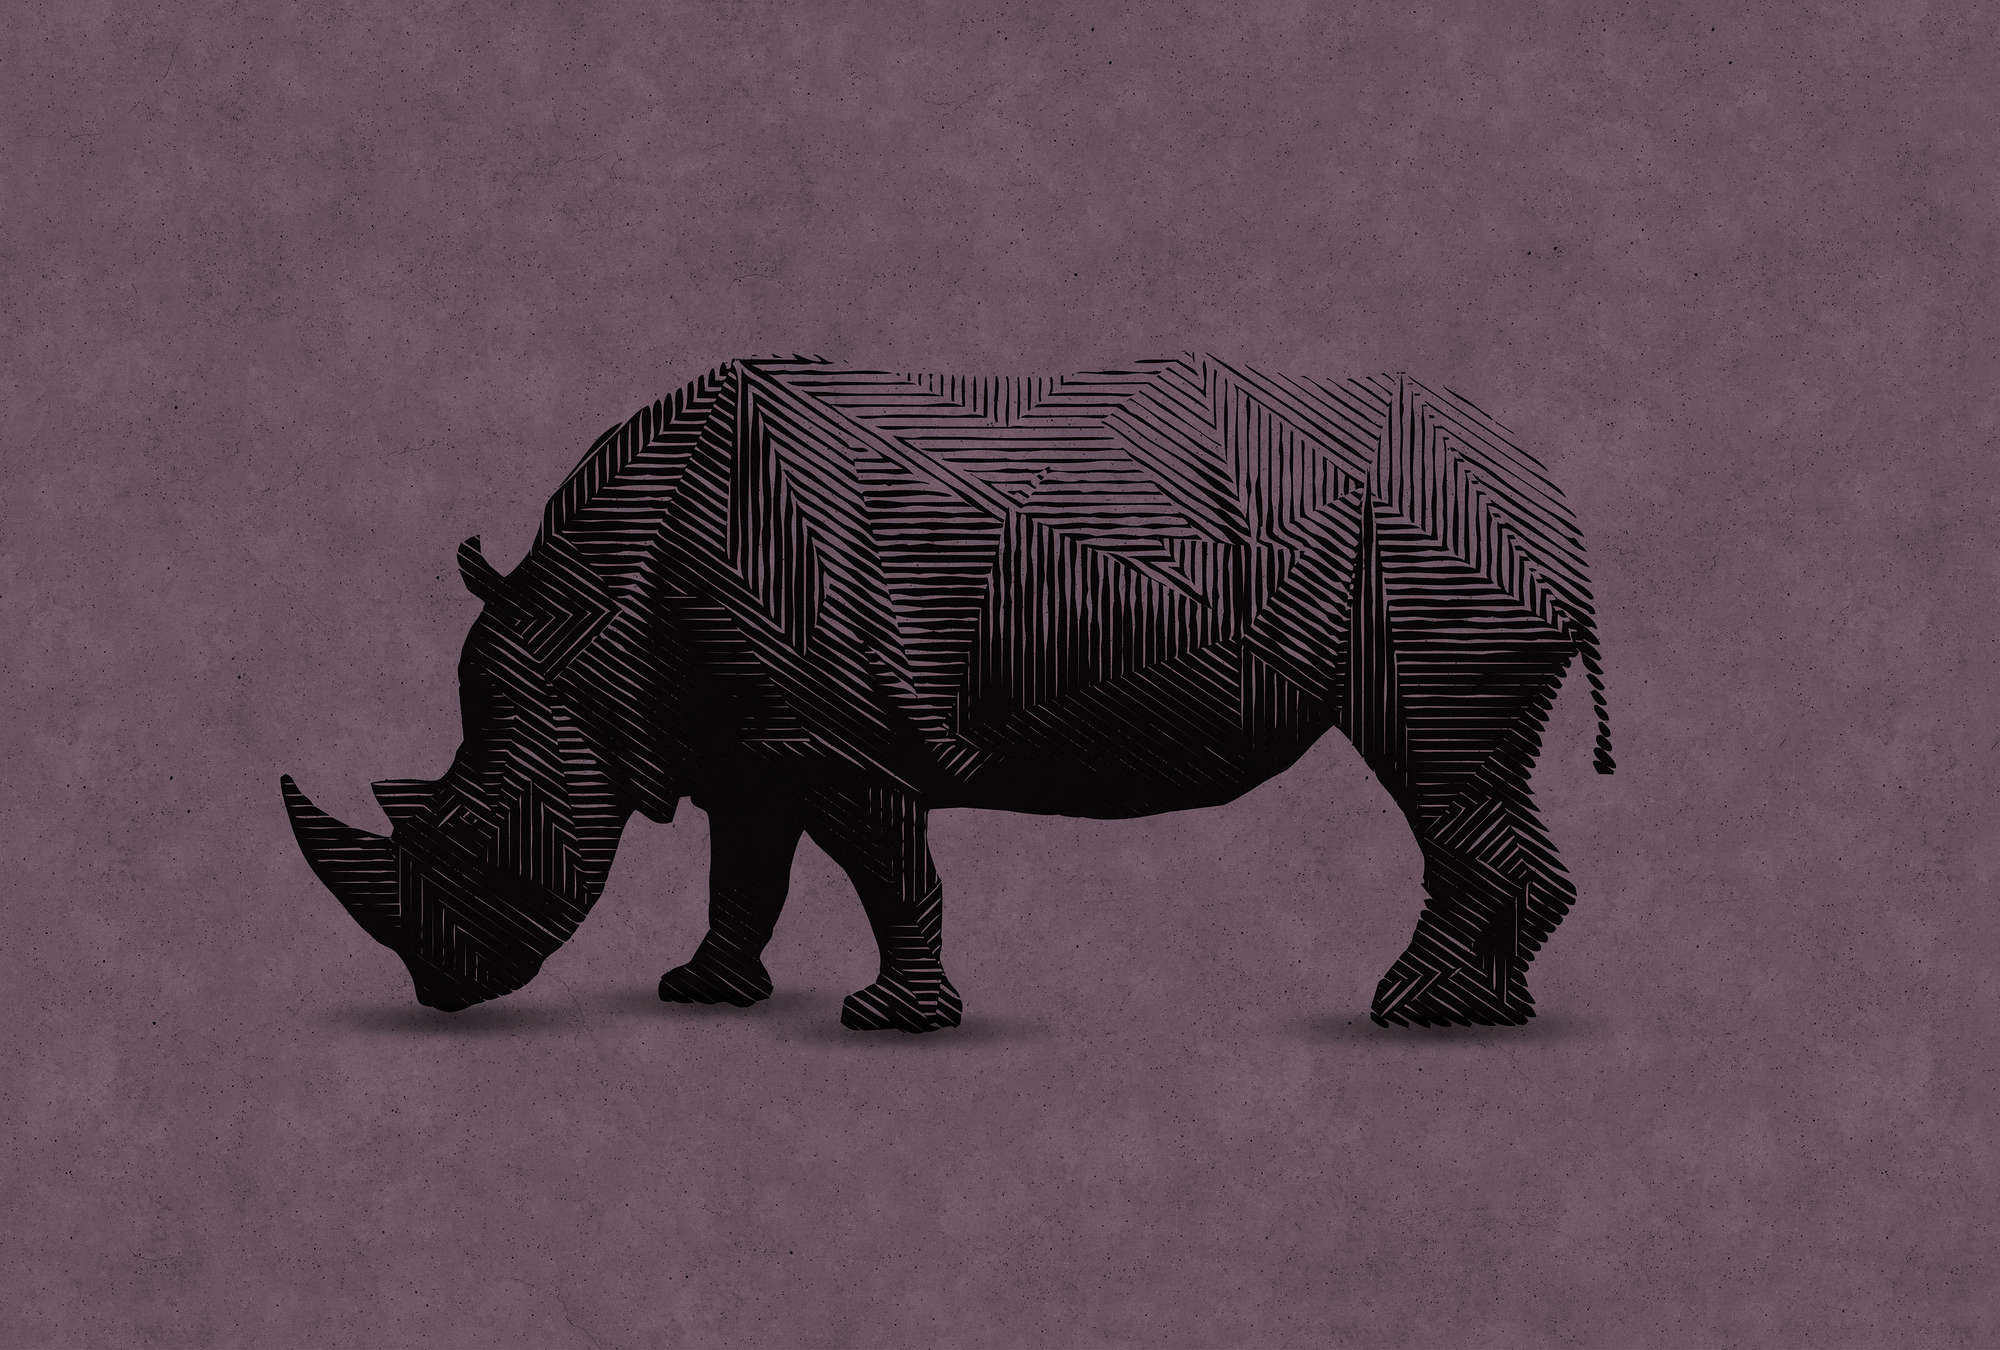             Modern mural with rhino in graphic style
        